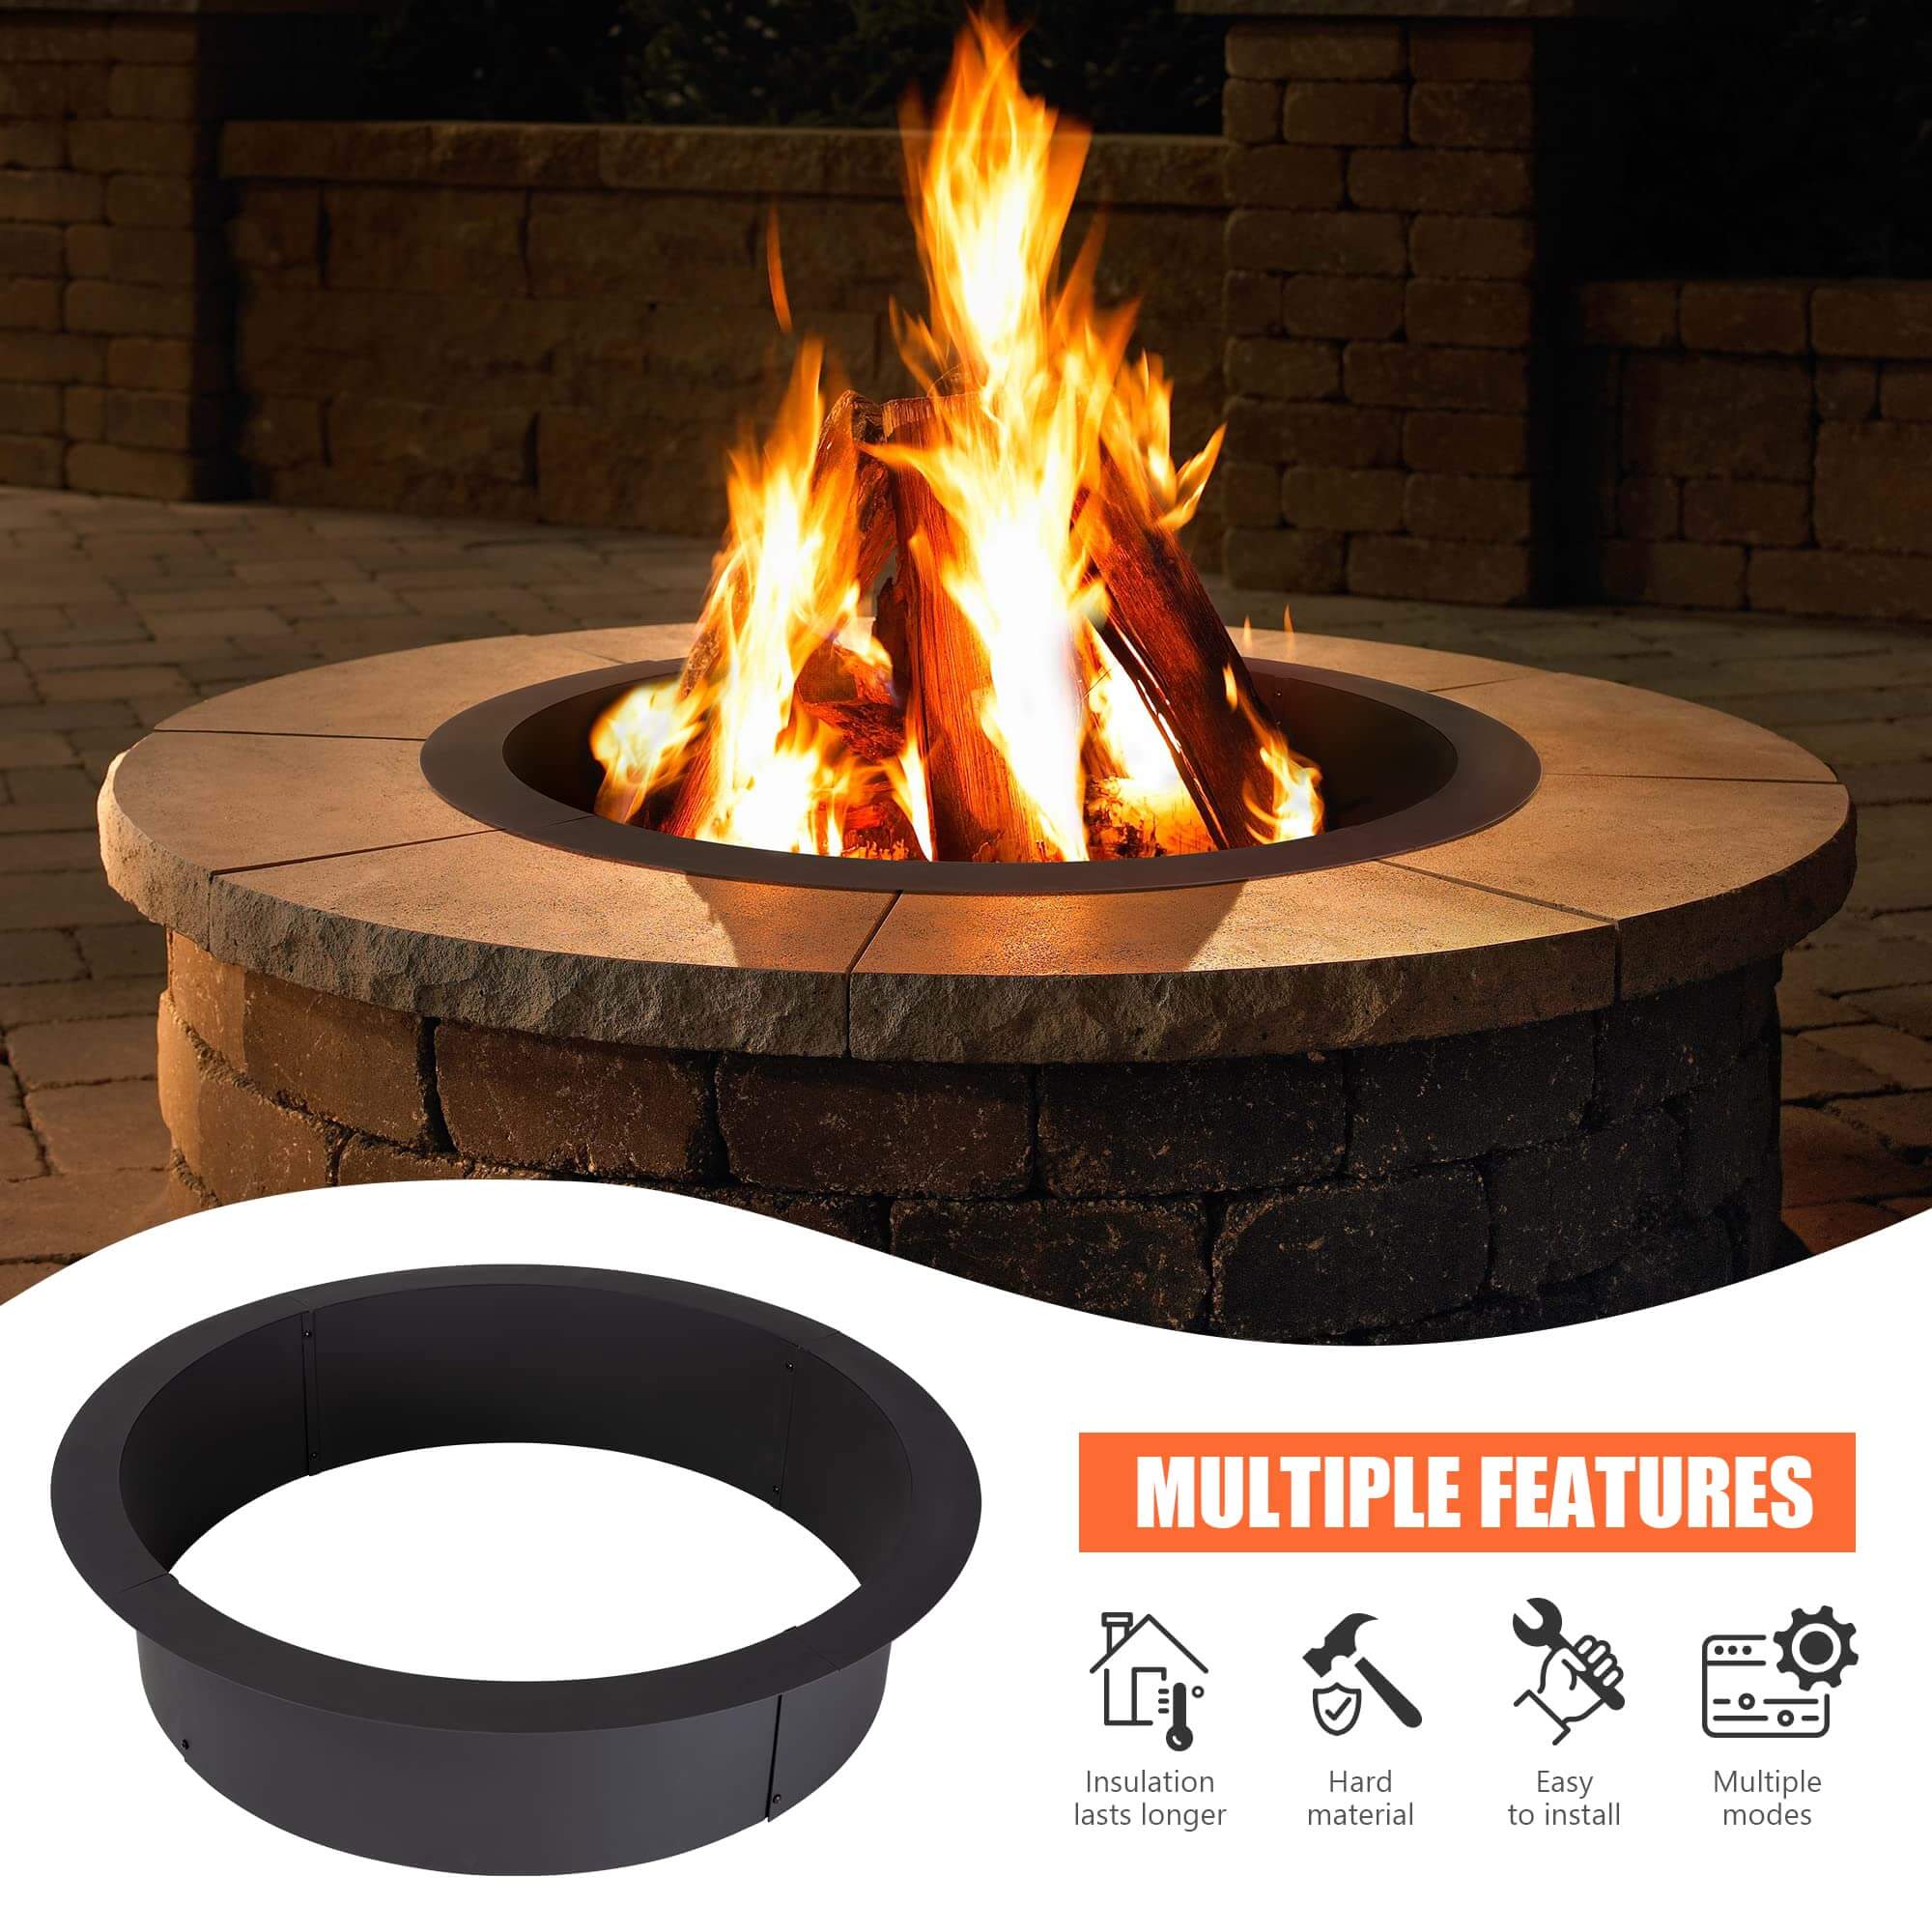 SUNCREAT-Heavy-Duty-Fire-Pit-Ring#size_39-inner-45-outer